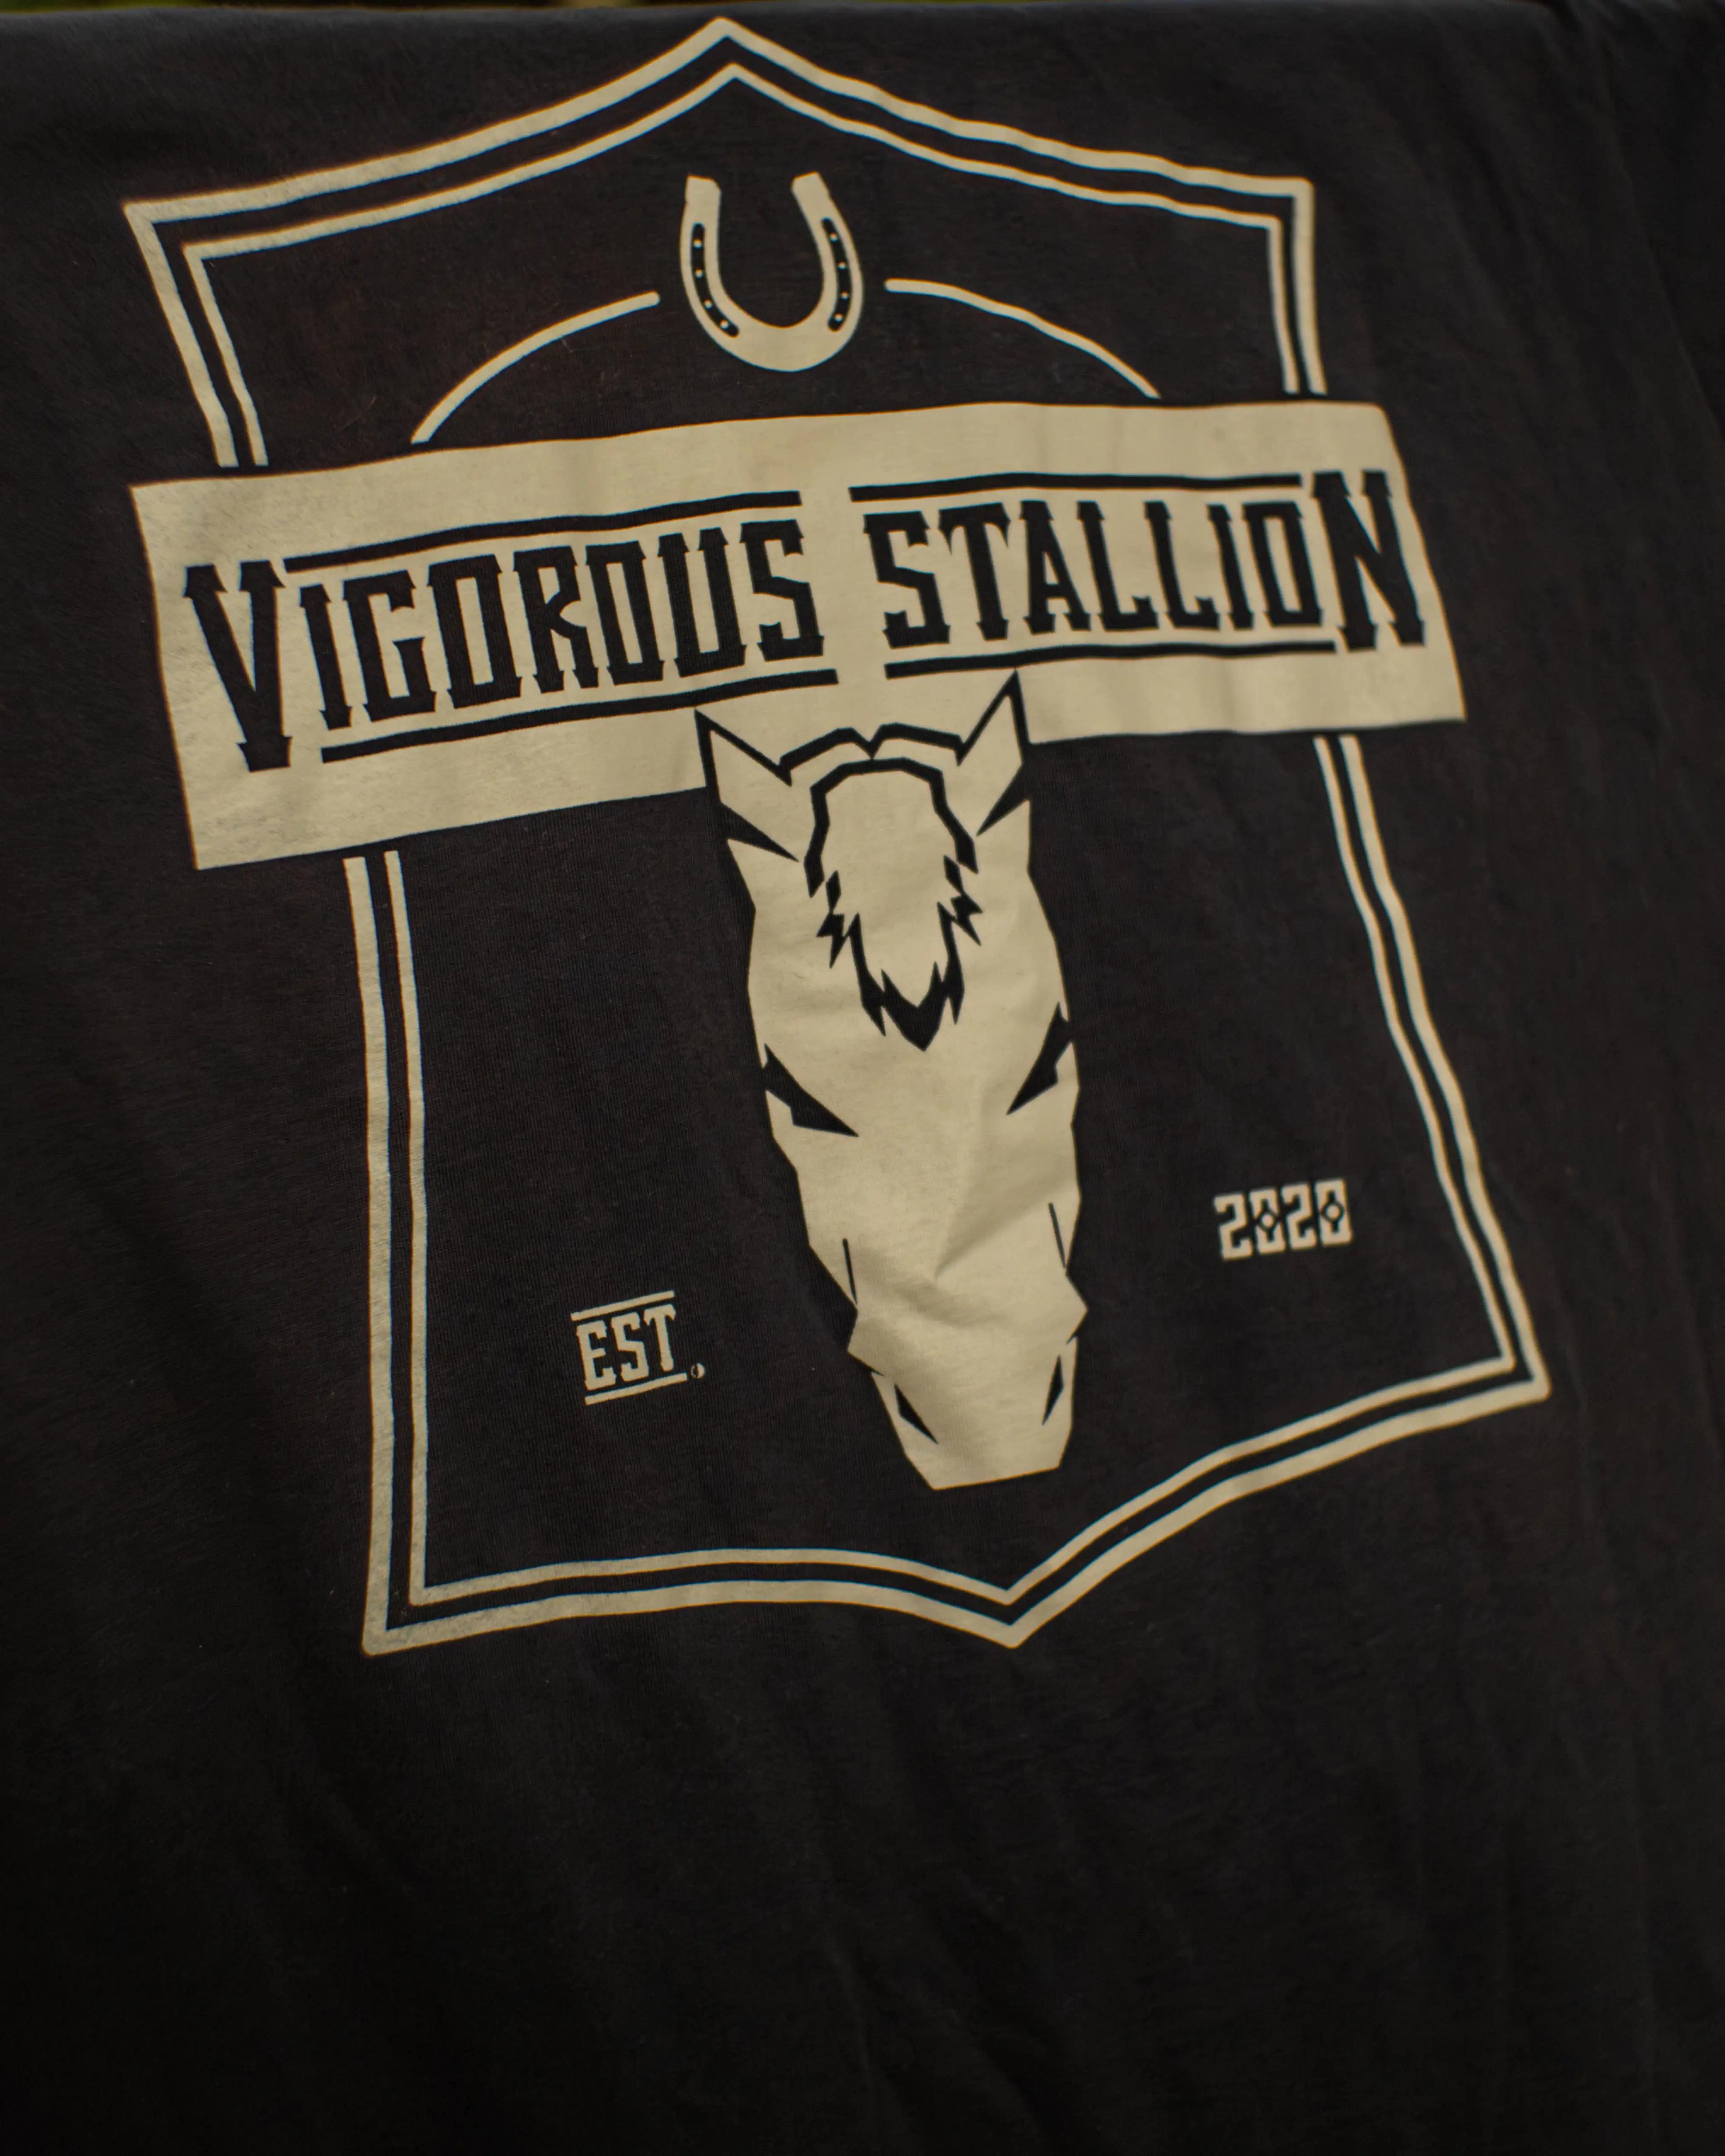 The Black Stallion shirt draped over a wood fence showing the back of the shirt.